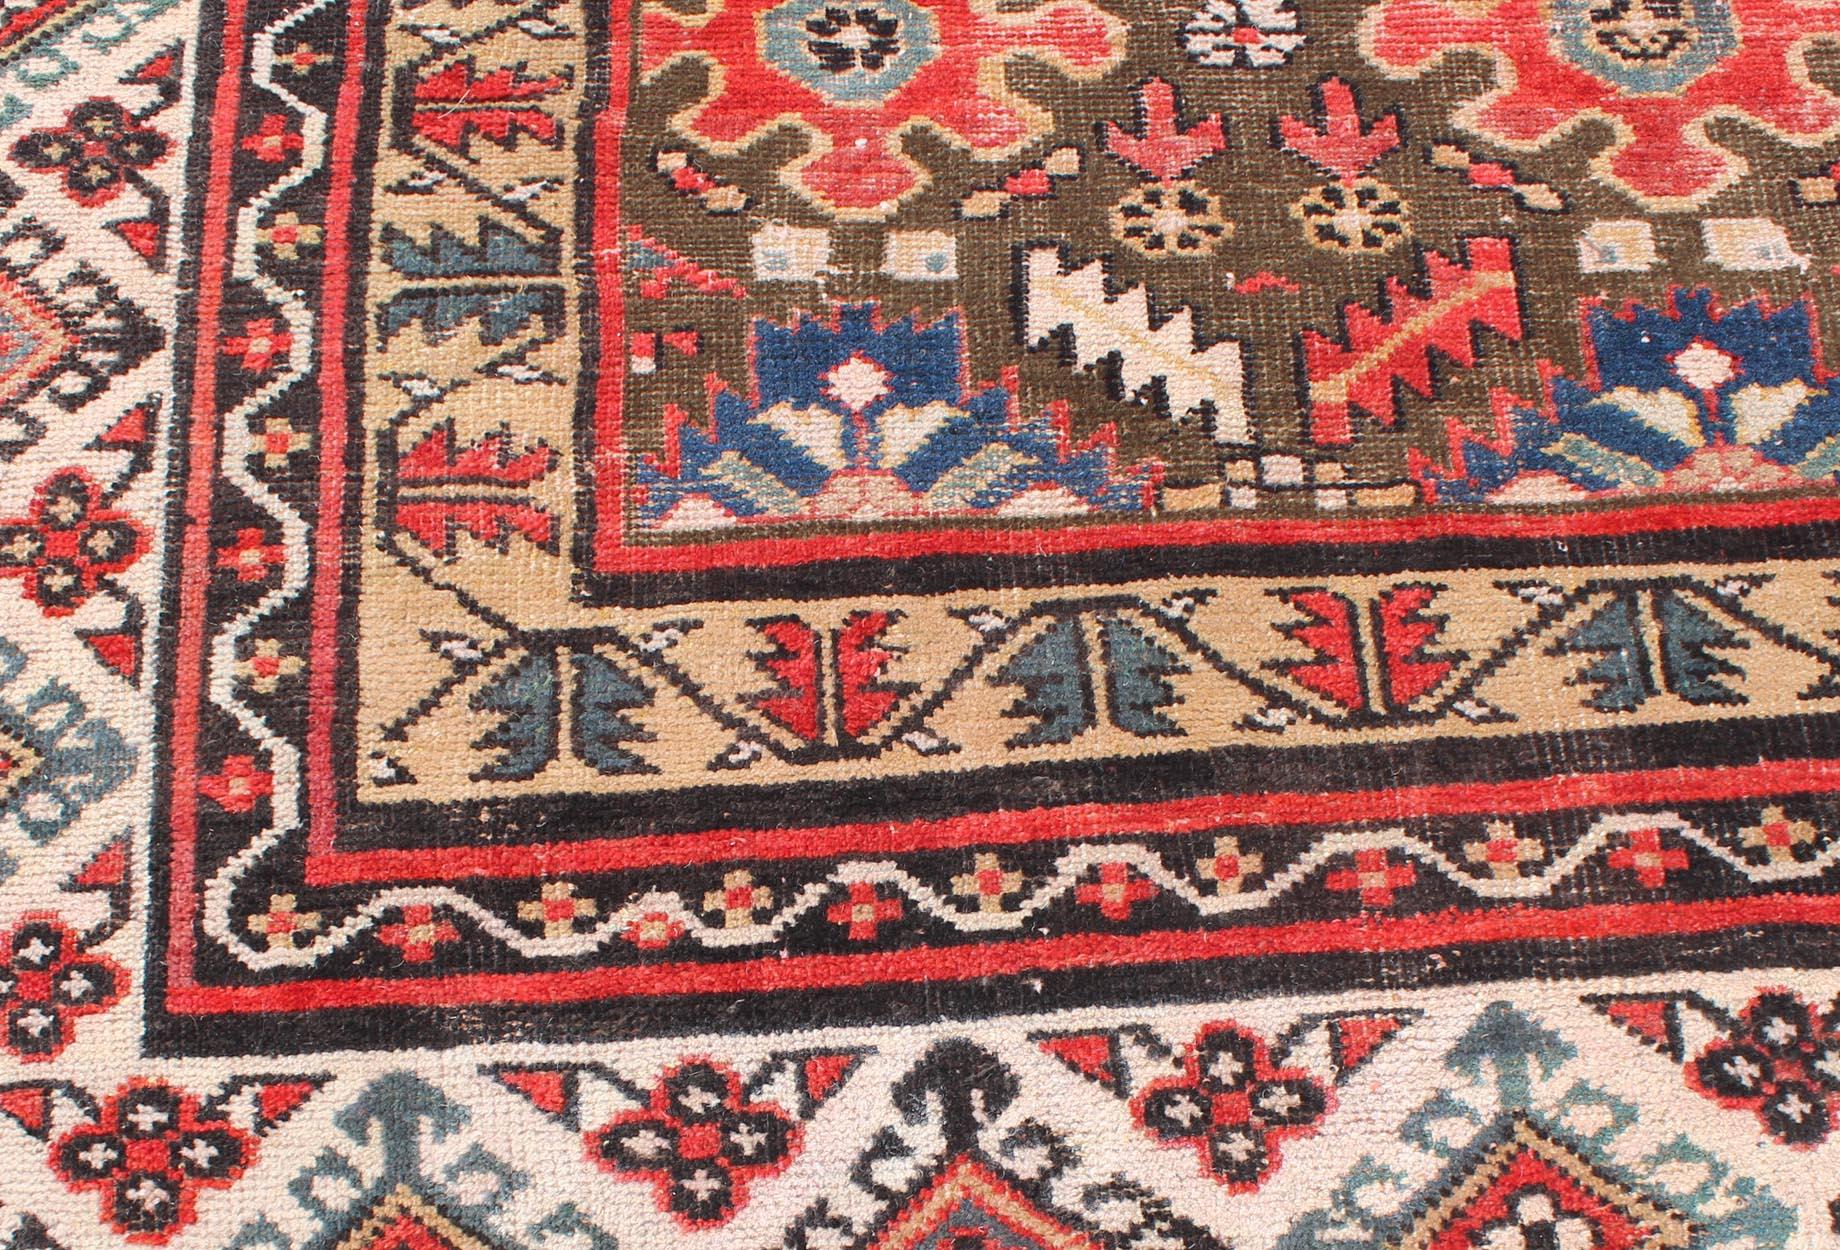 Persian Large Antique Kurdish Rug with All-Over Design in Brown/Green, Red, and Blue For Sale